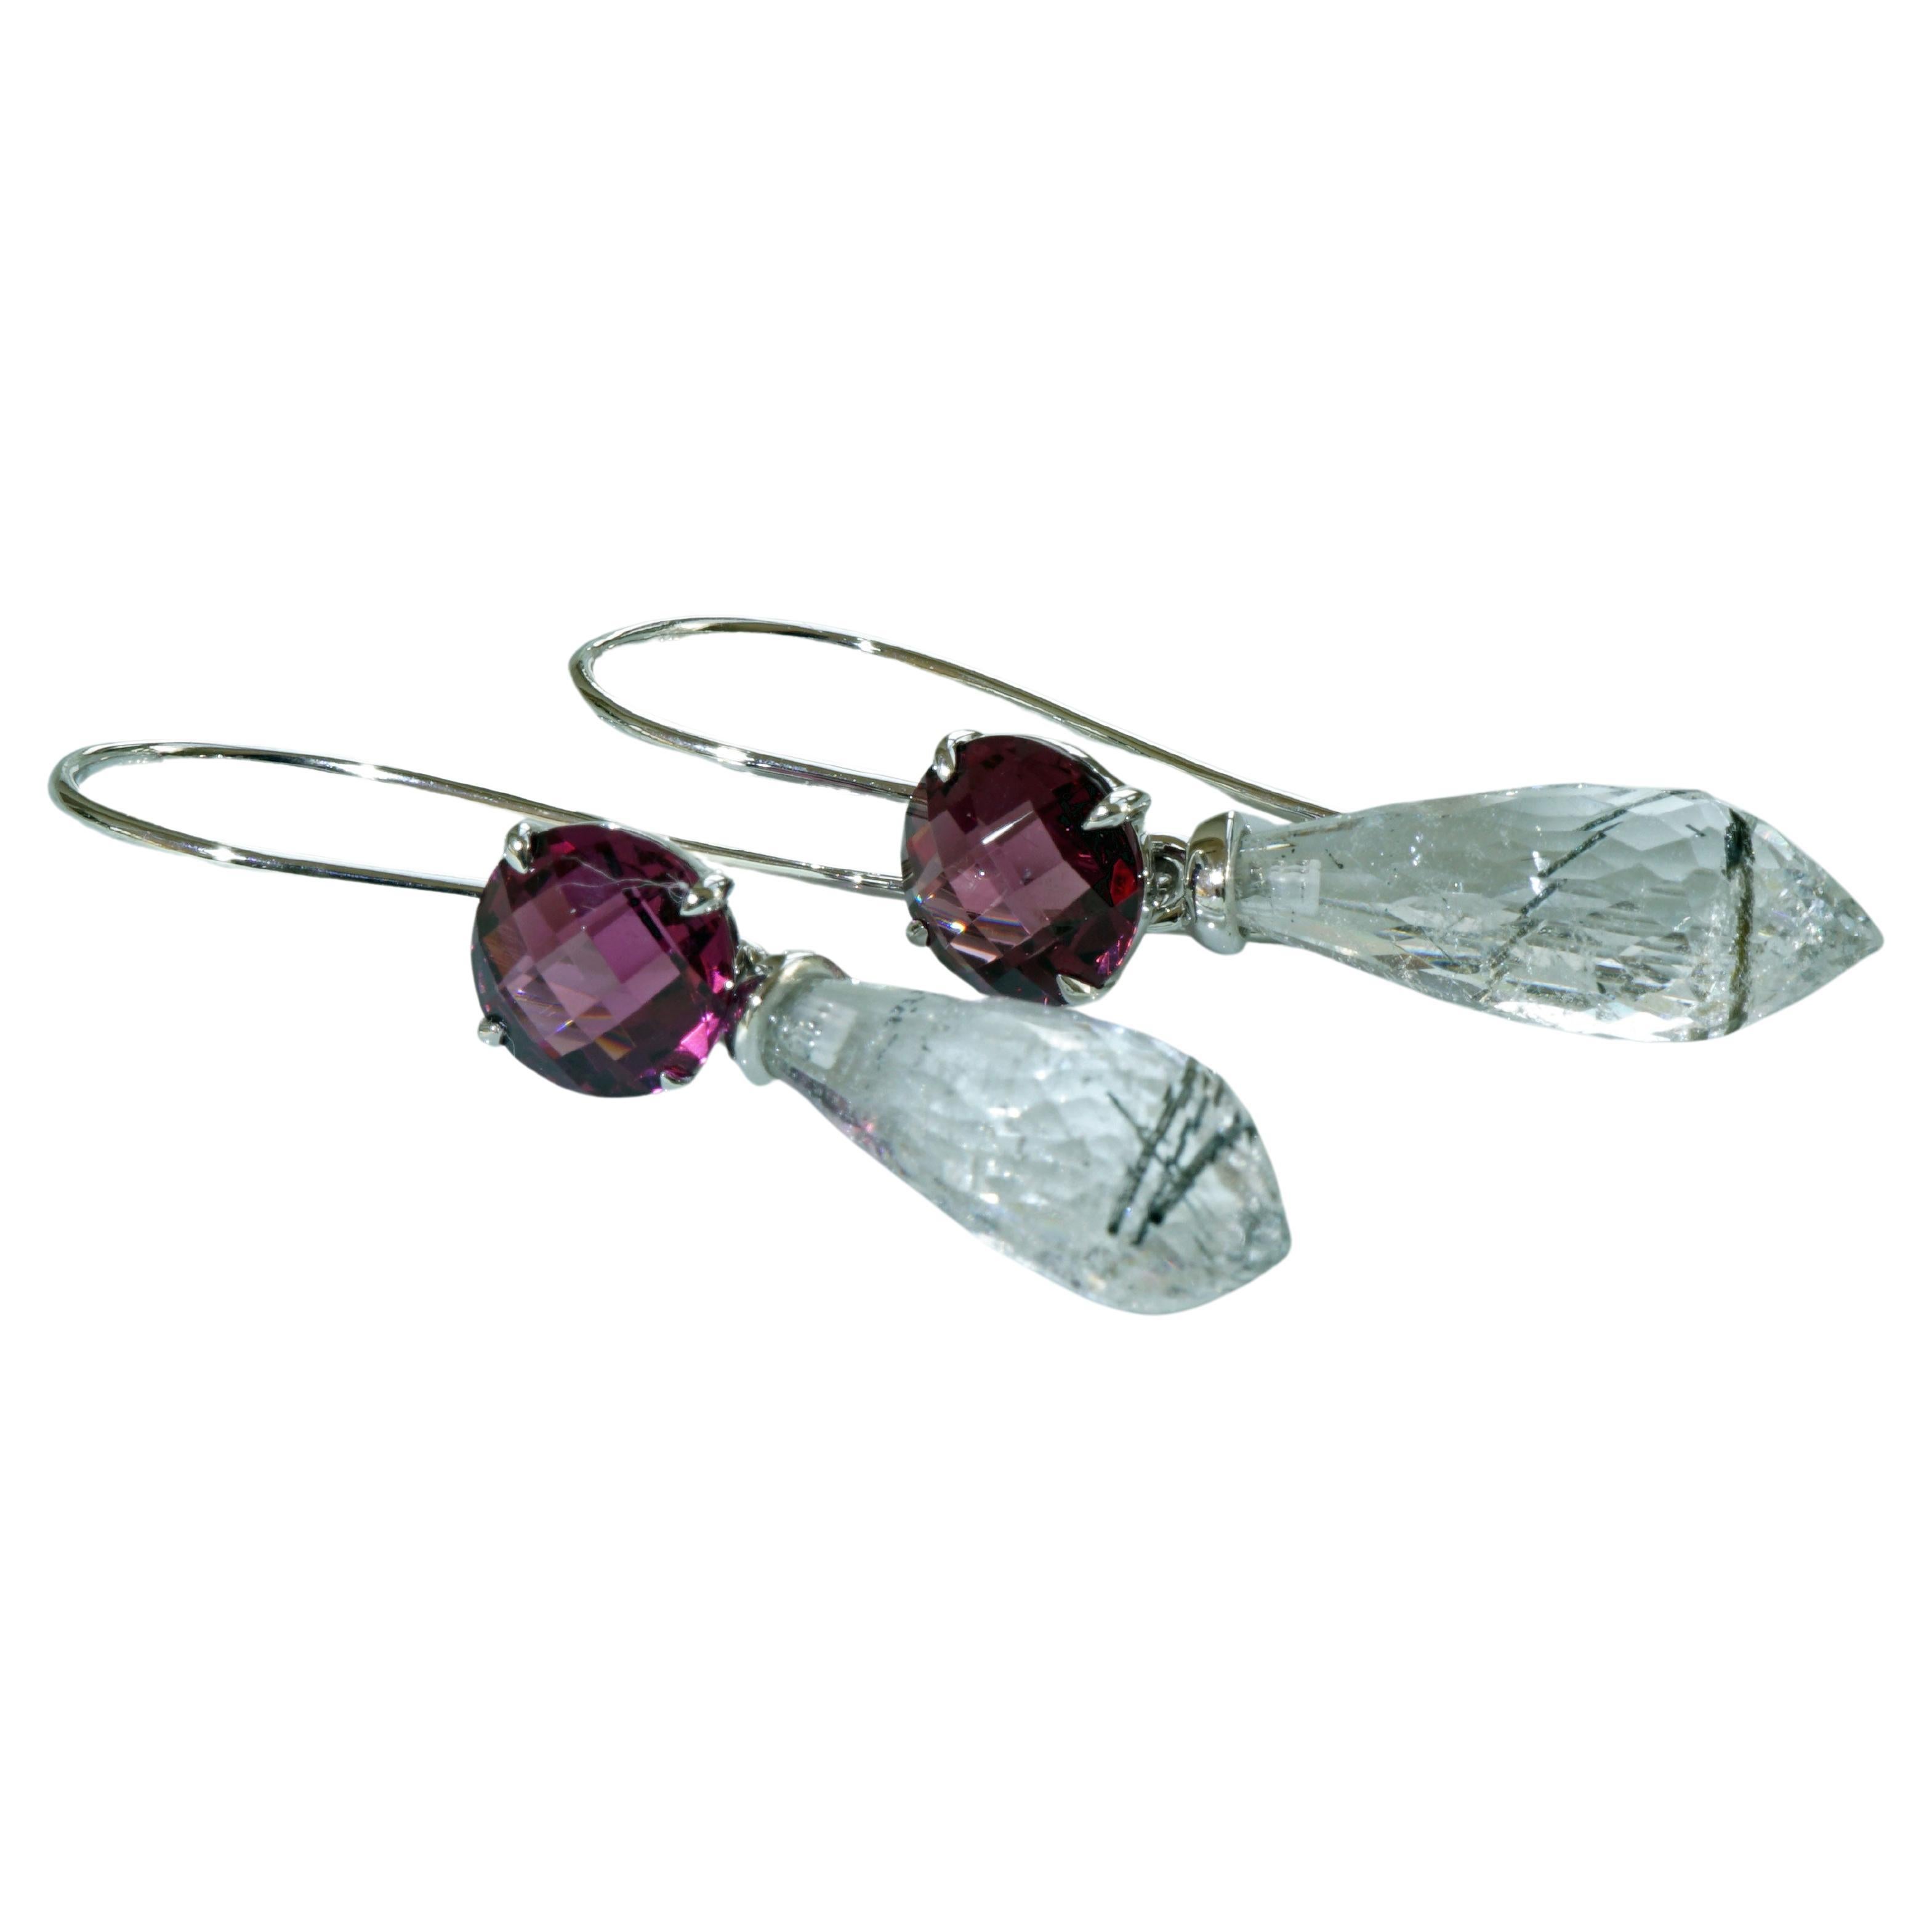 Earring with two hooks with detachable pendants, very easy to hang out, rhodolite approx. 4.96 ct, approx. 7,5 mm Diameter, in 750 white gold, pendants in a lot of colors available (please ask for here we offer rutil quartz approx 14.59 ct), lenght